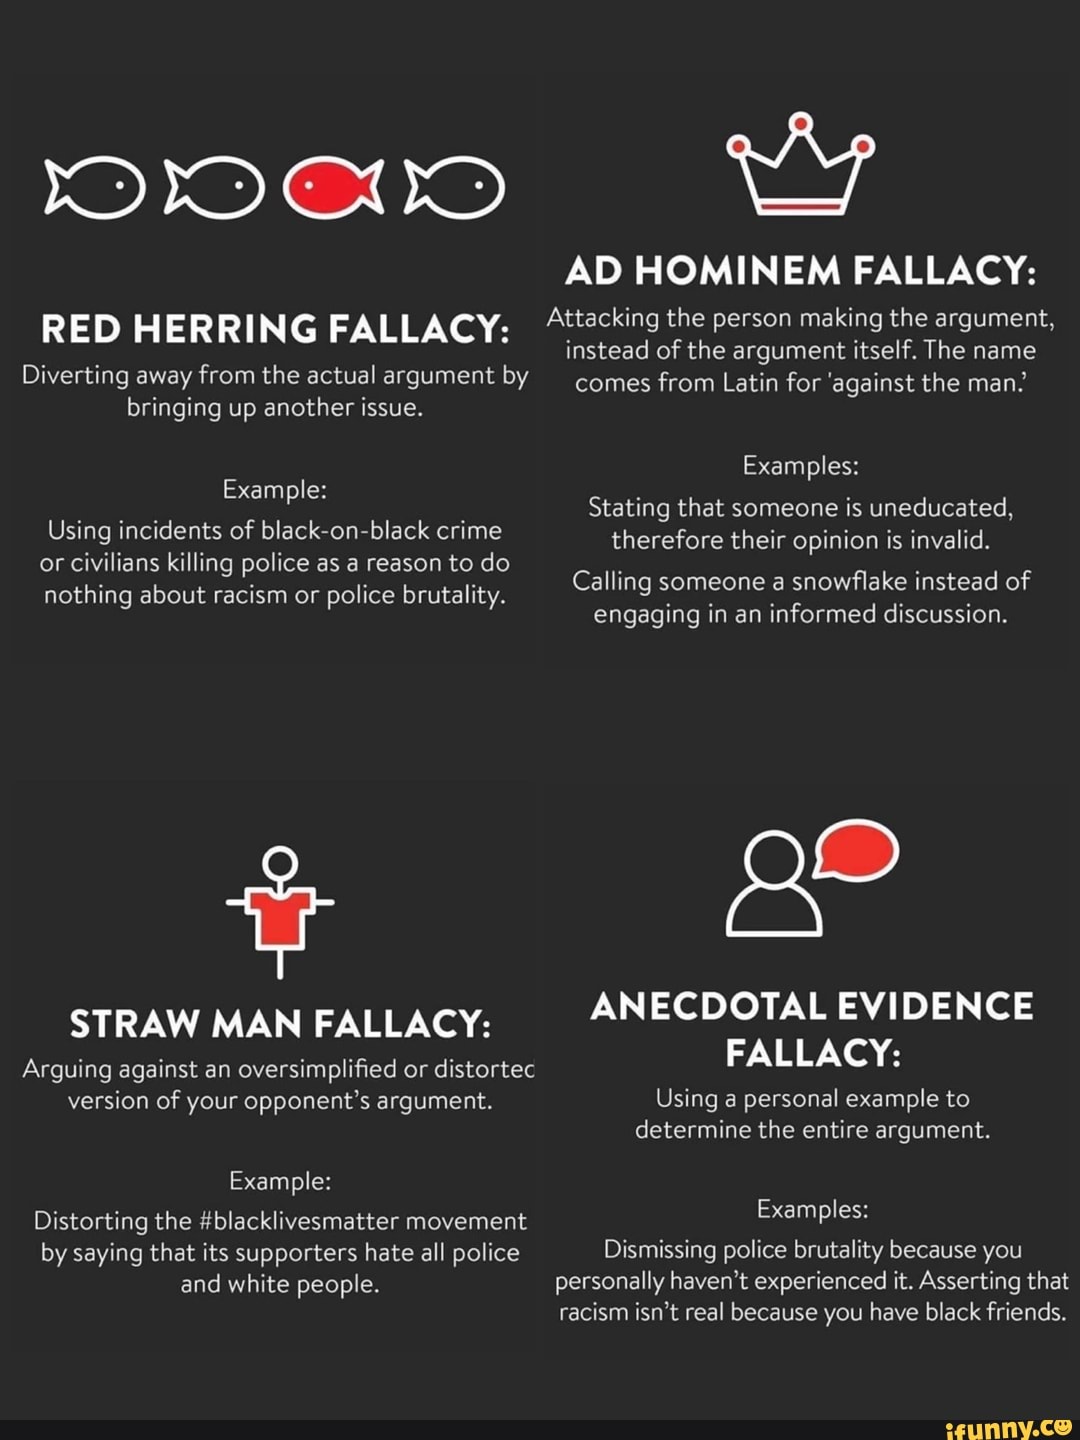 examples of a red herring fallacy